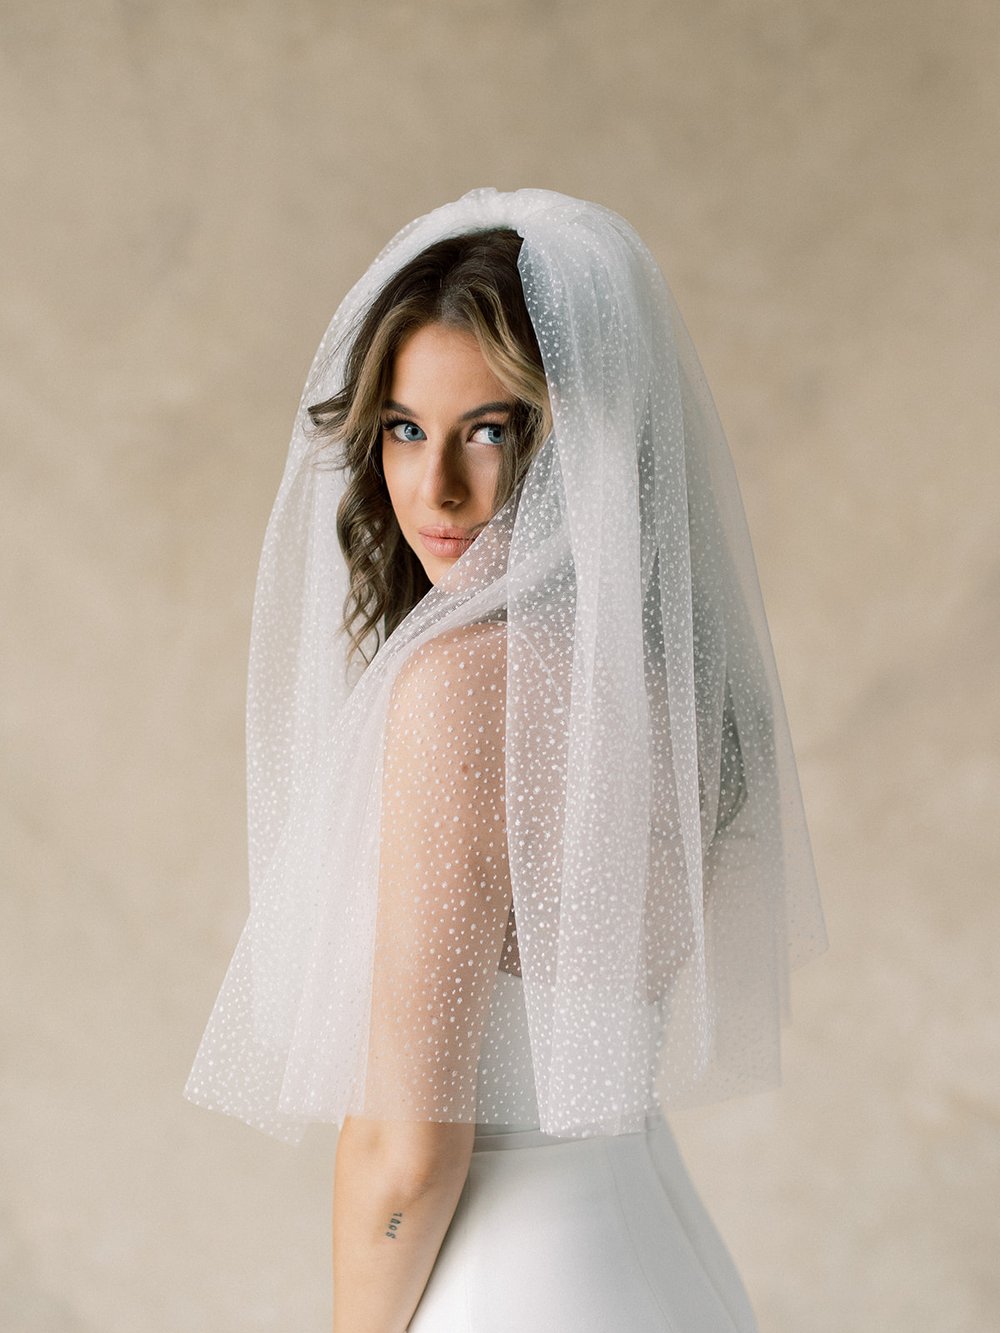 Two Tier Fingertip Veil With Sparkly Beadings | Wedding Veil | Beaded Veil  | Short Wedding Veil | Tulle Veil | Tulle Wedding Veil | VG1020